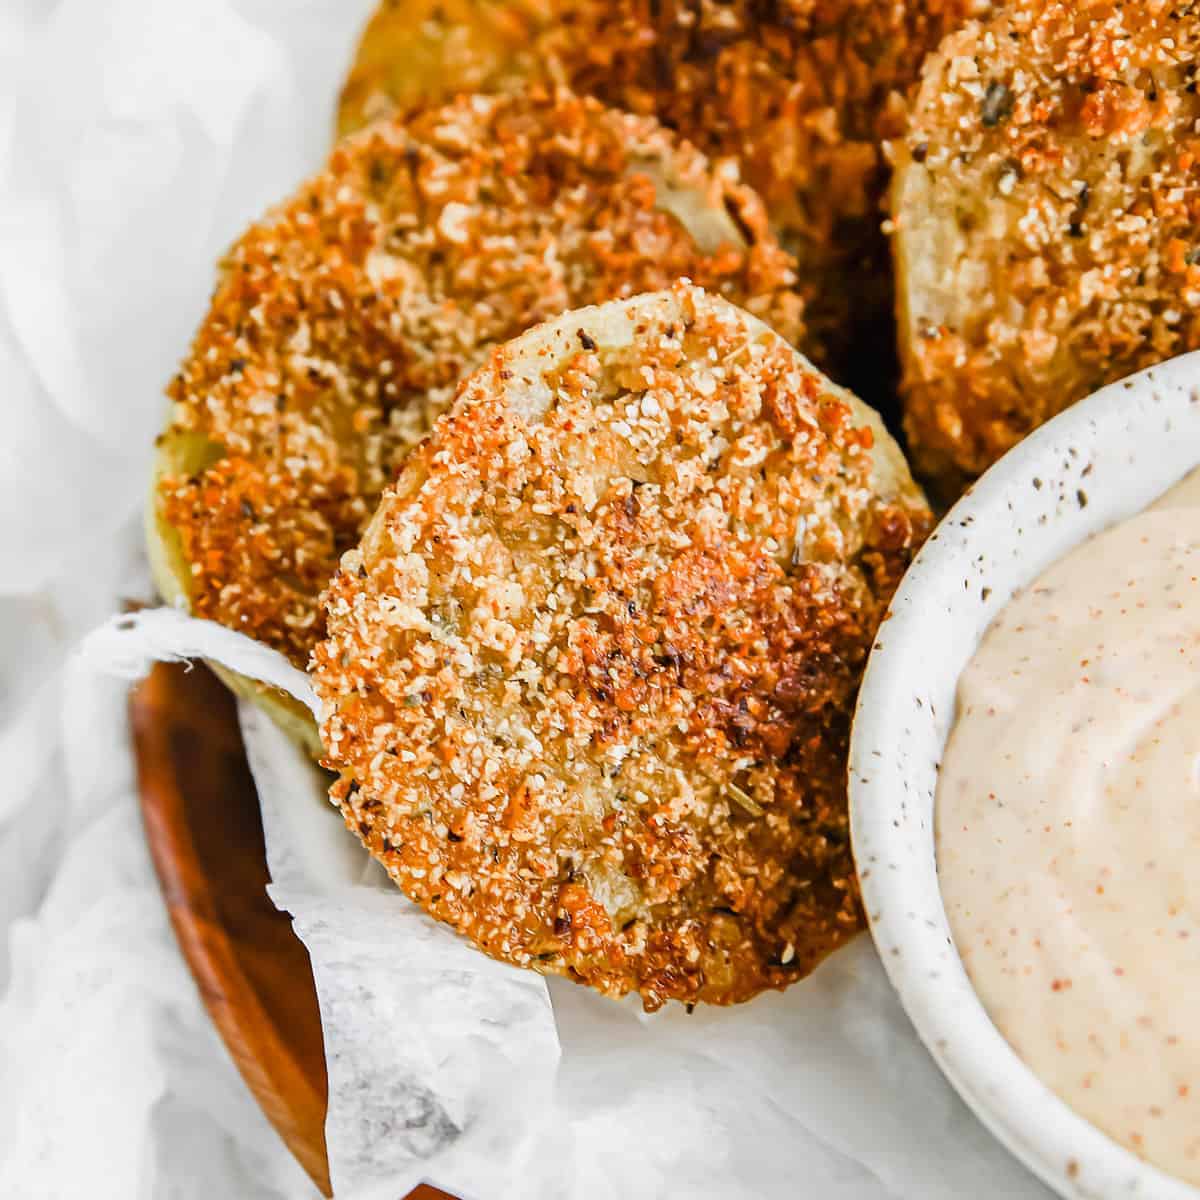 Keto fried green tomatoes with zesty sauce